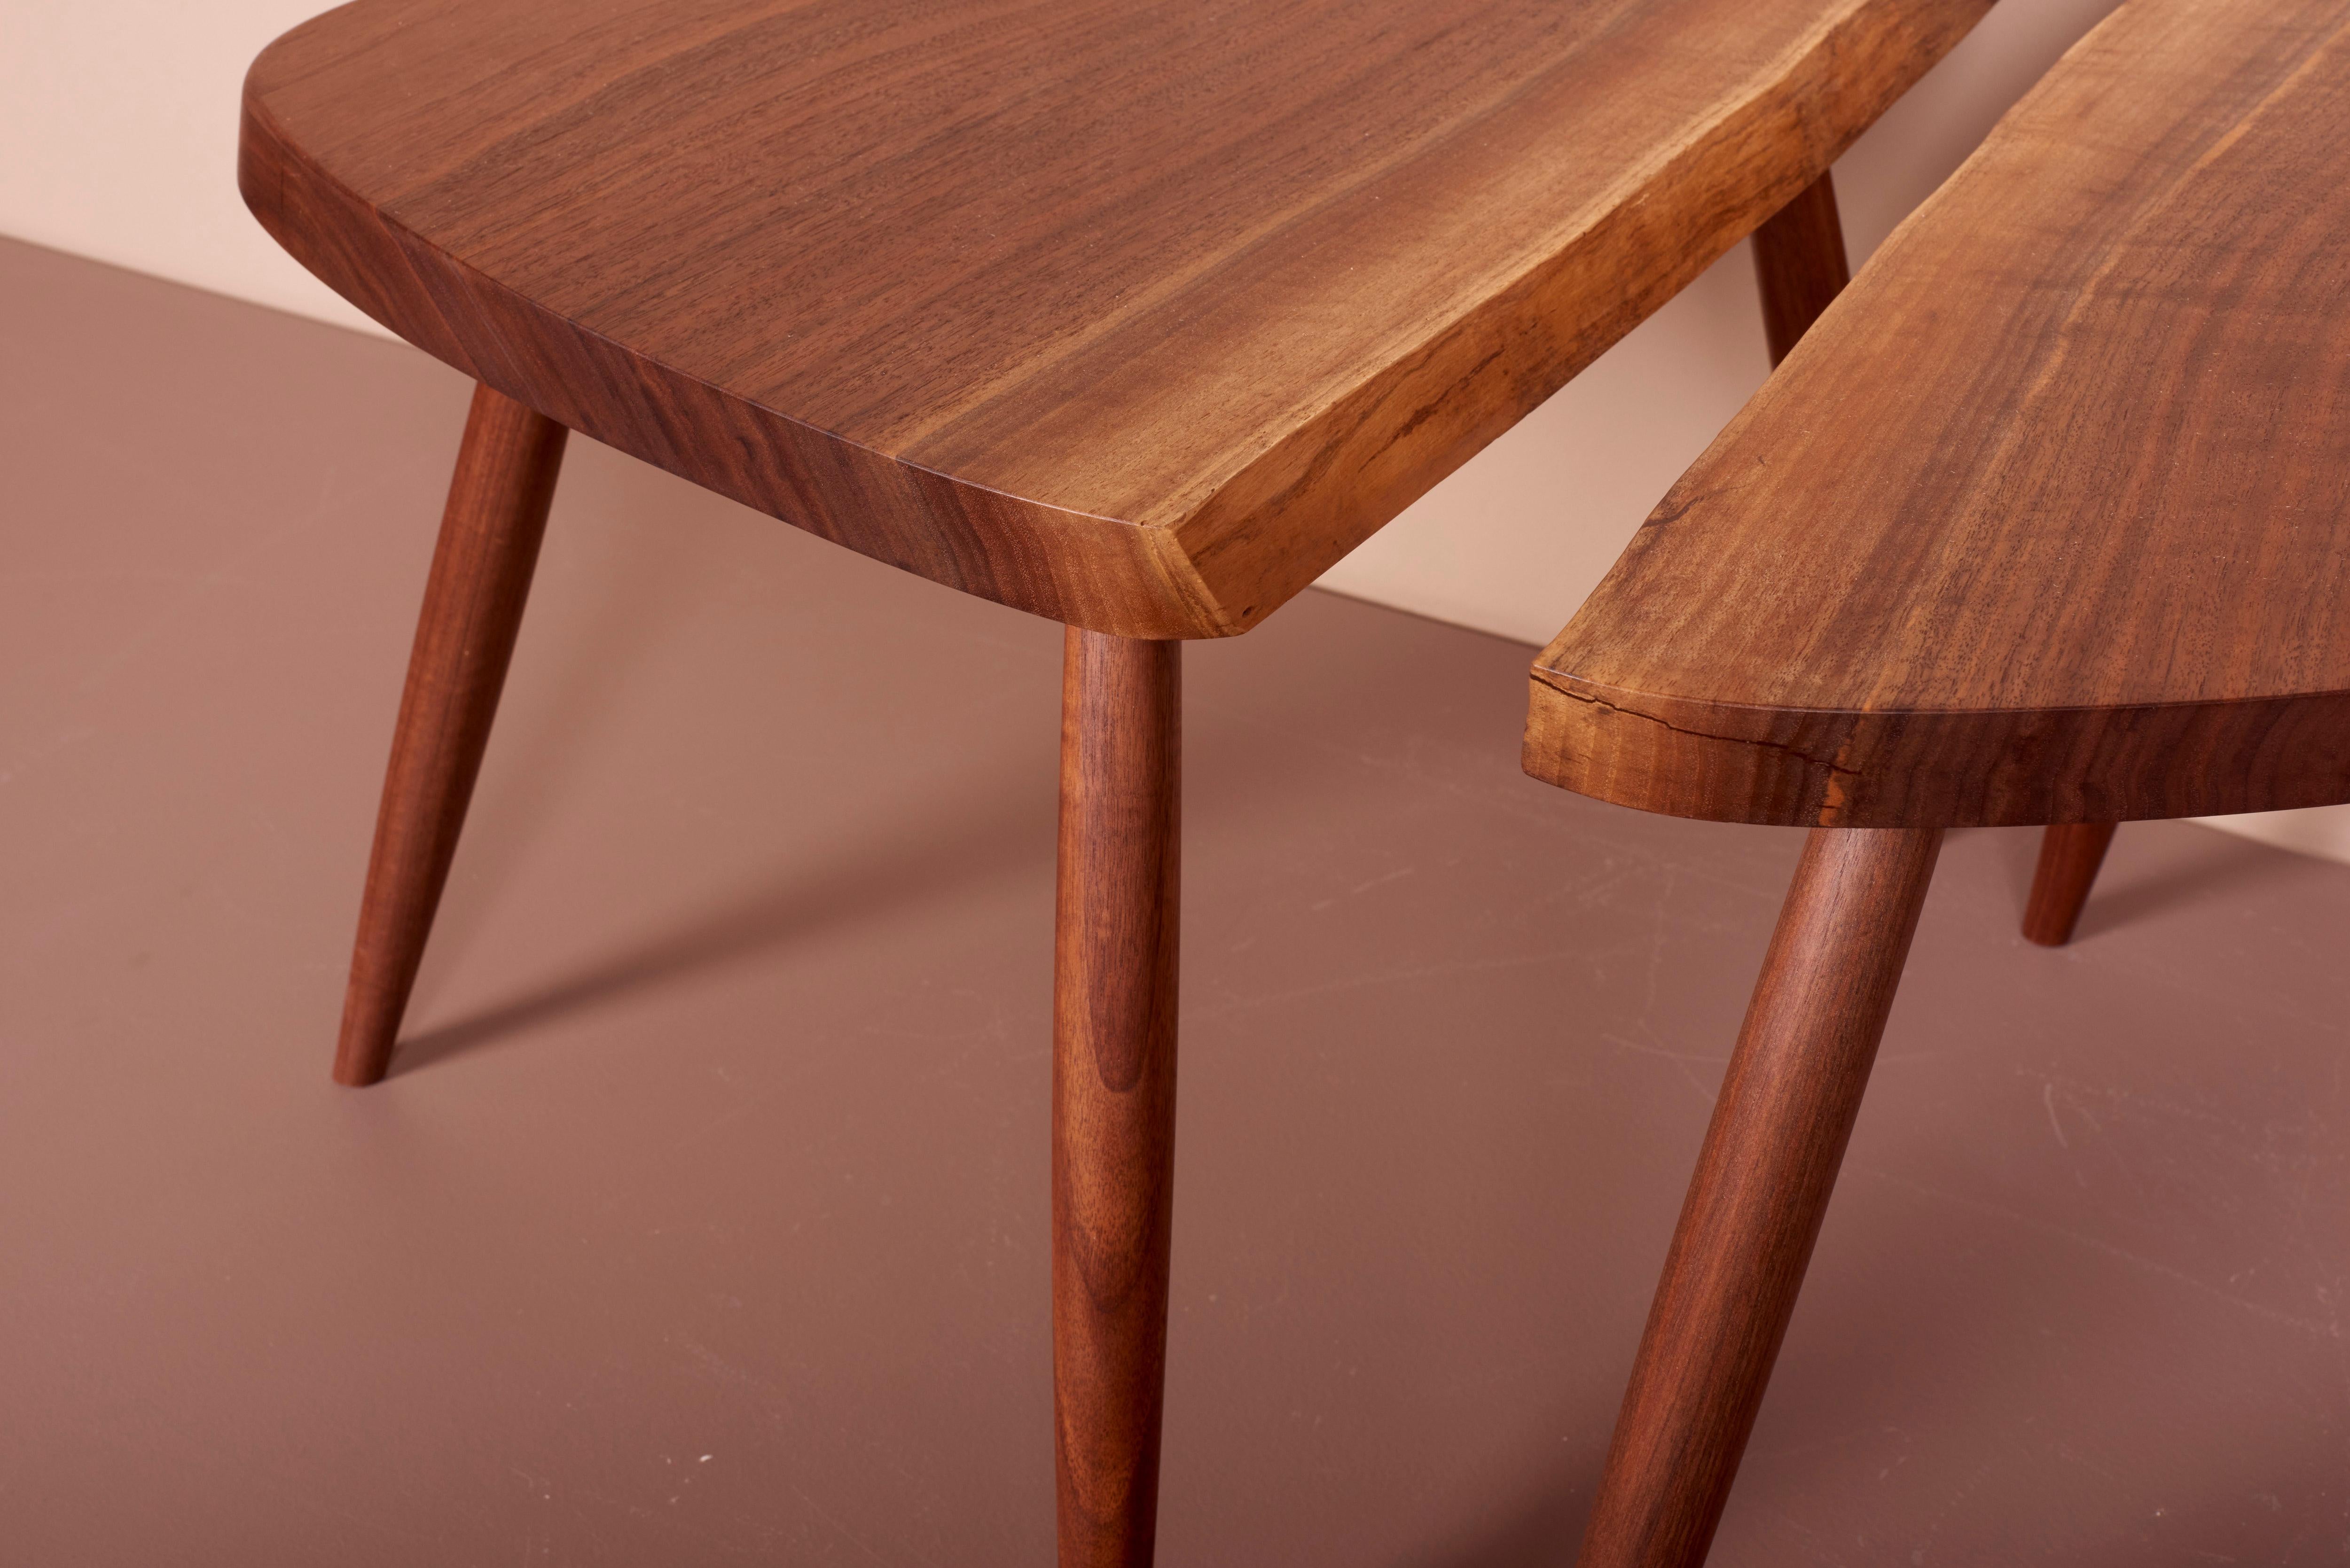 Pair of Mira Nakashima Wepman Side Tables based on a design by George Nakashima For Sale 7